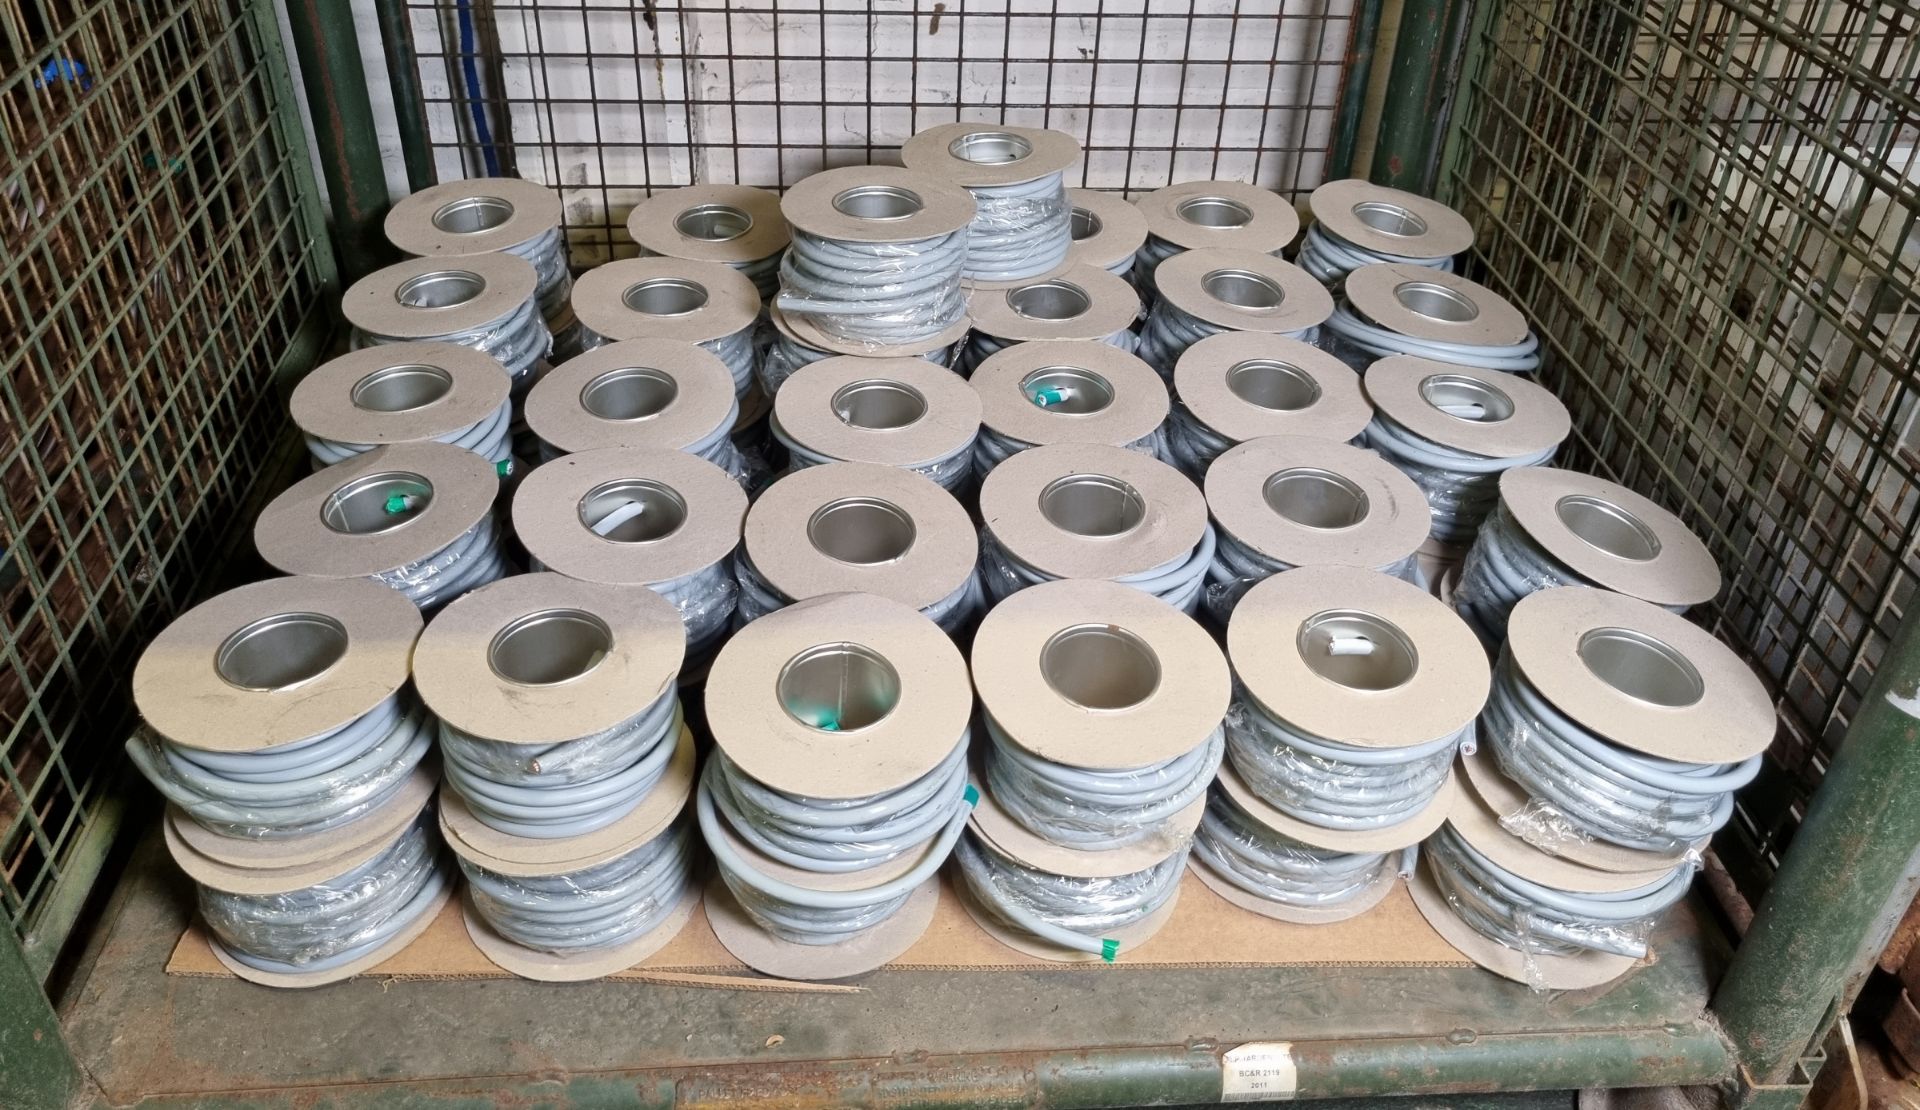 62x reels of 25mm double insulated single core cable - unknown length - 1 reel weighs 3.3kg - Bild 2 aus 3